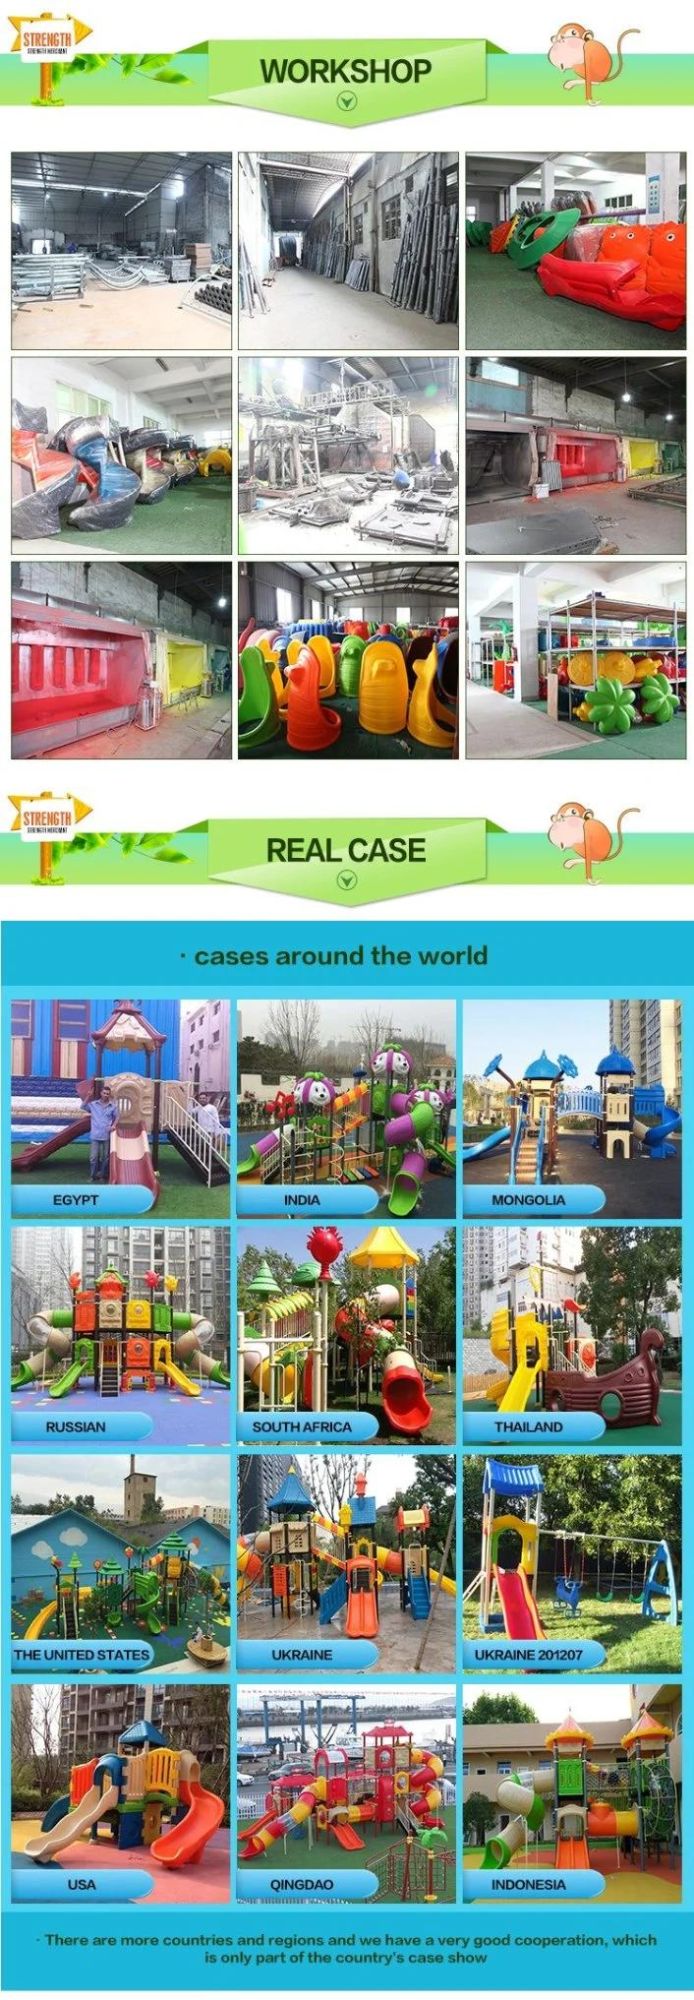 Luxurious Big Children Park Outdoor Playground Plastic Merry Go Round for Sale 4 in 1 Bicycle